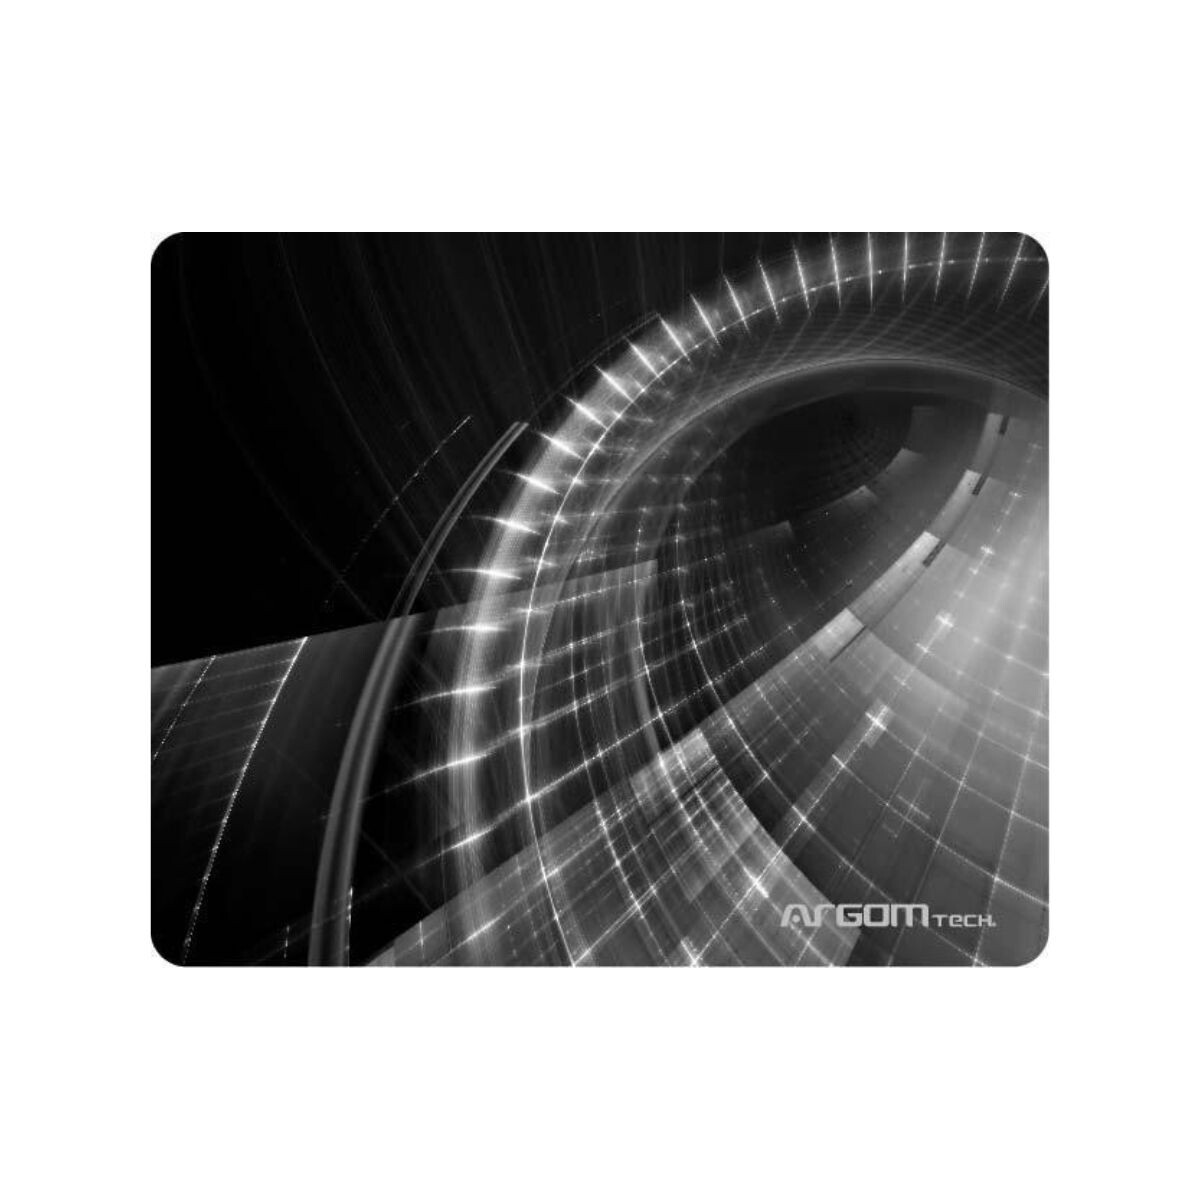 Mouse pad Argom galaxia 